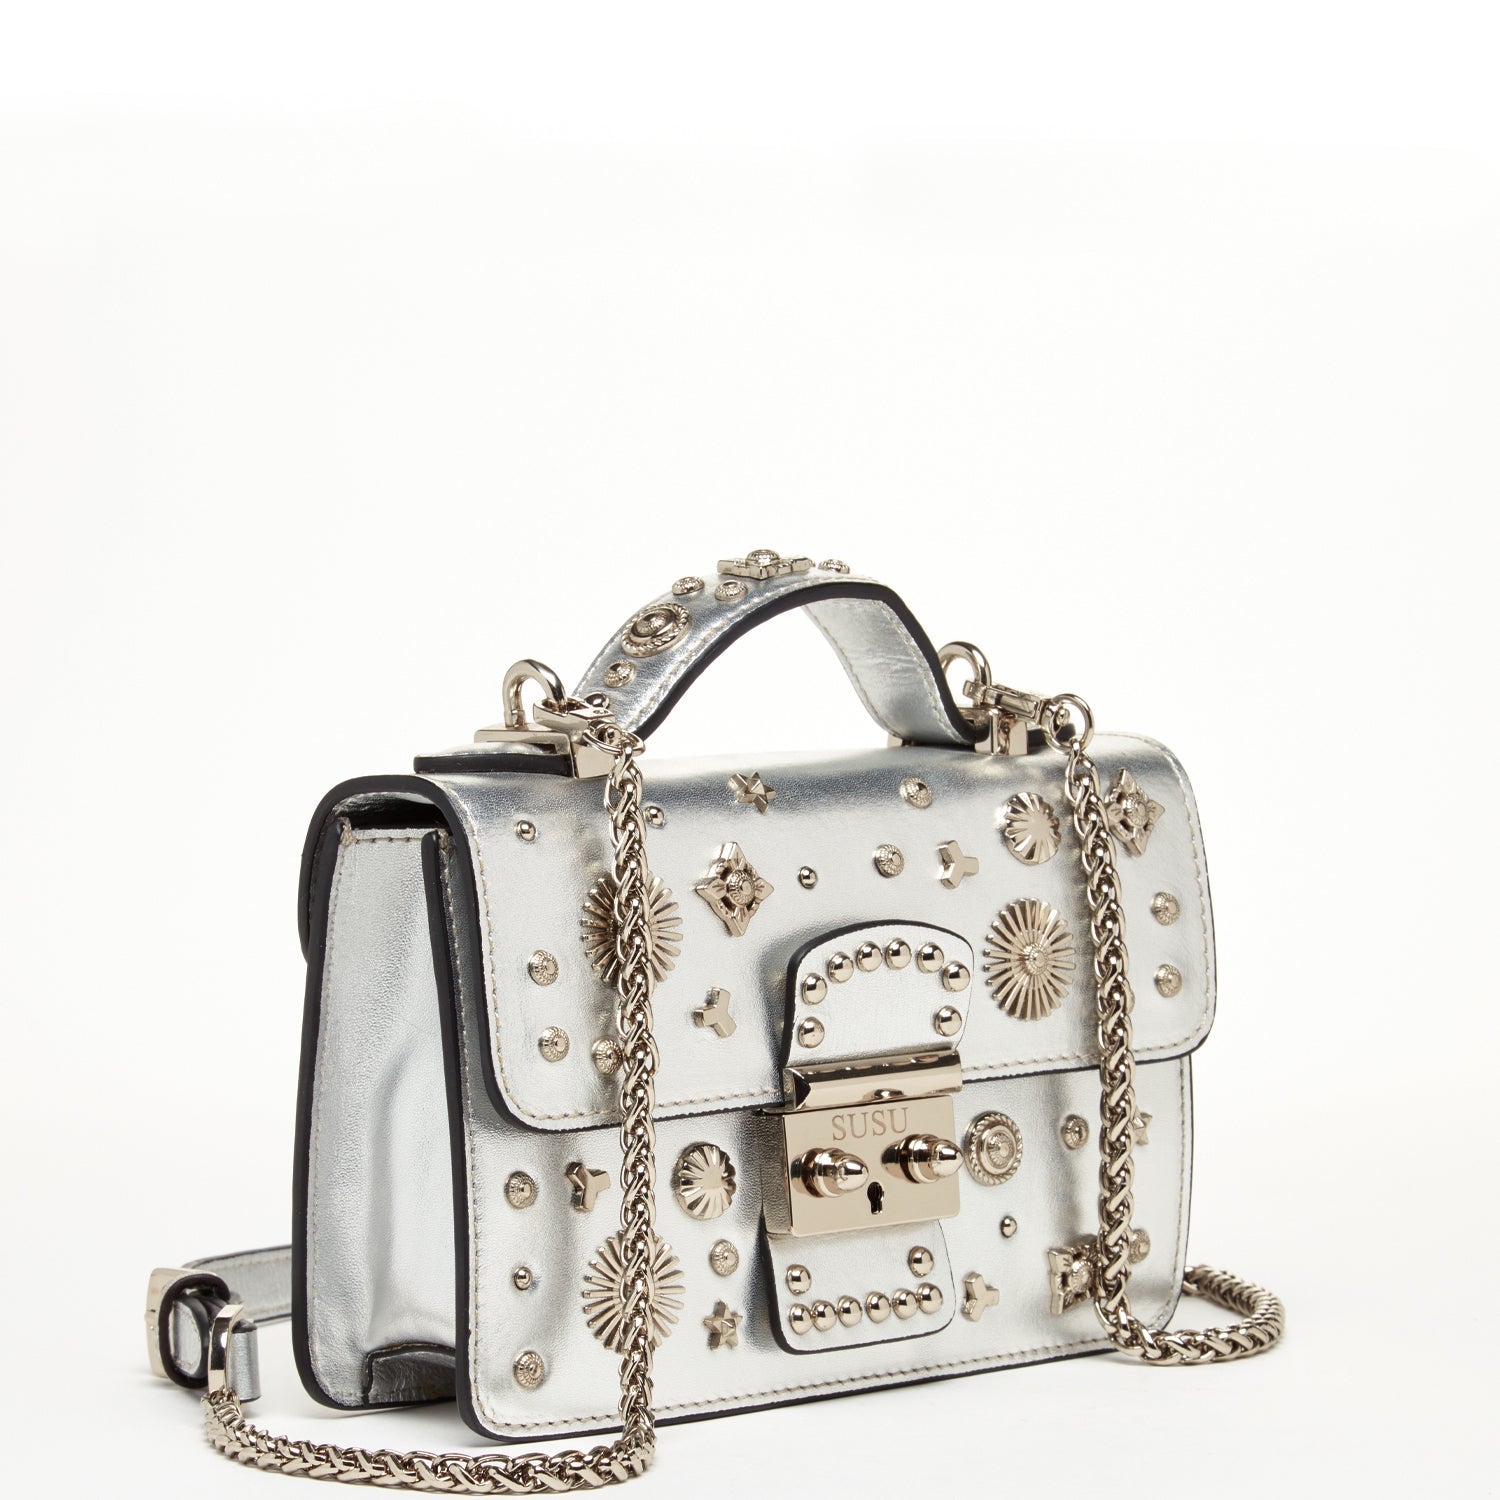 The Hollywood Leather Crossbody Bag Silver - Guy Christopher 